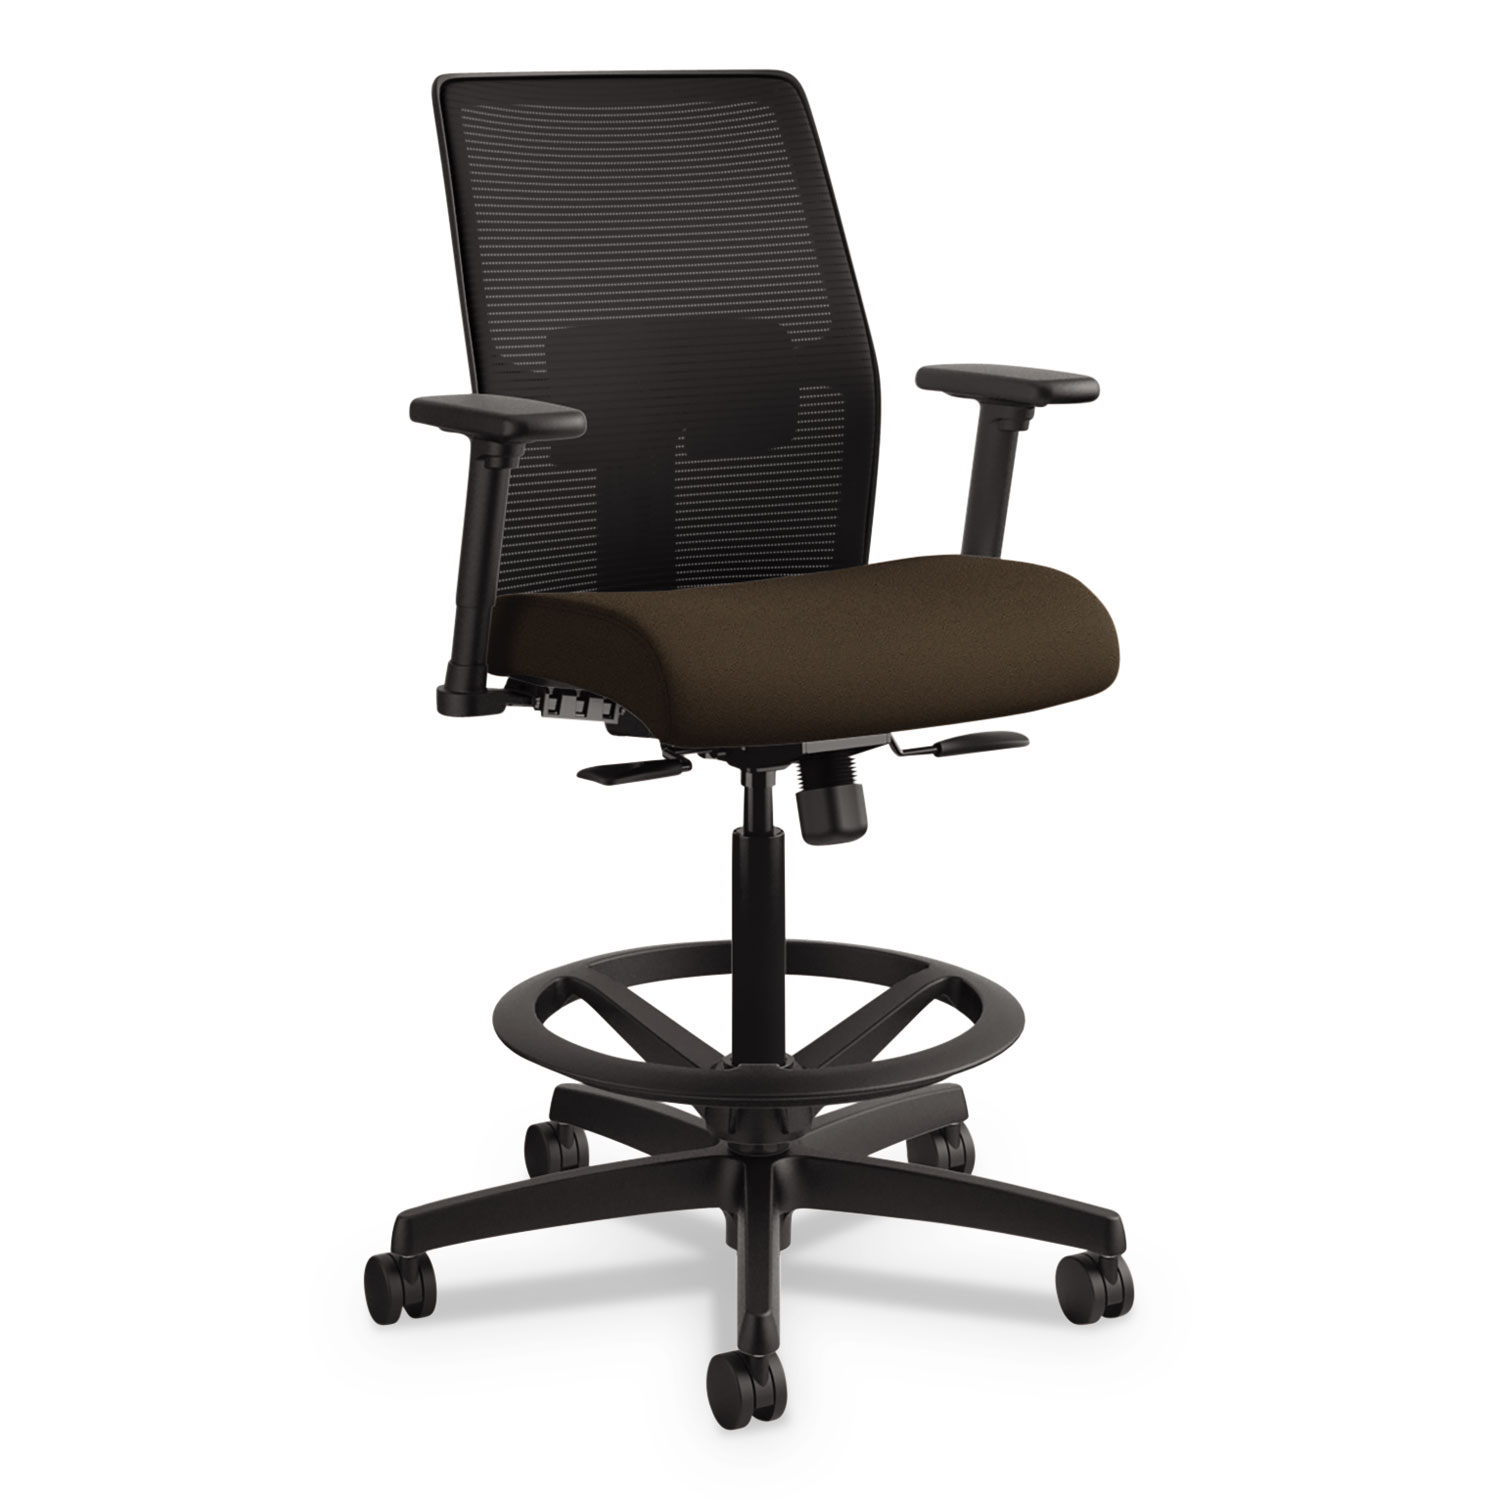  HON I2S1AMLC49T Ignition 2.0 Ilira-Stretch Mesh Back Task Stool, 32 Seat Height, Up to 300 lbs., Espresso Seat/Black Back, Black Base (HONI2S1AMLC49T) 